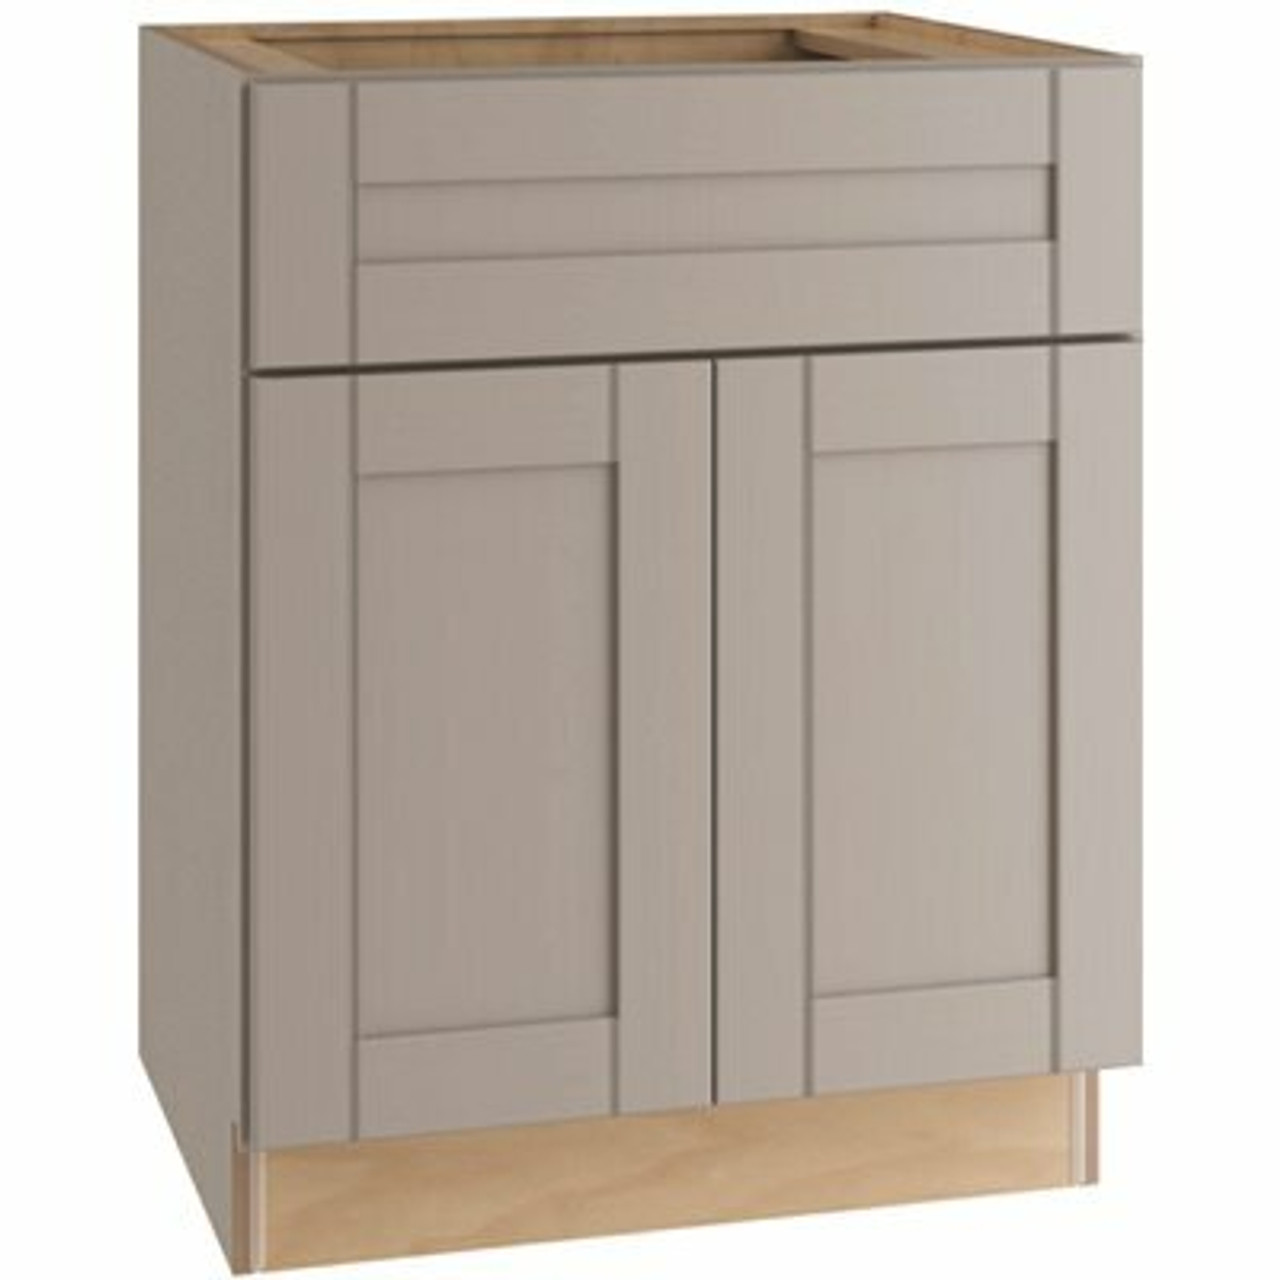 Arlington Veiled Gray Shaker Assembled Plywood 30 In. X 34.5 In. X 21 In. Bath Vanity Sink Base Cabinet With Soft Close